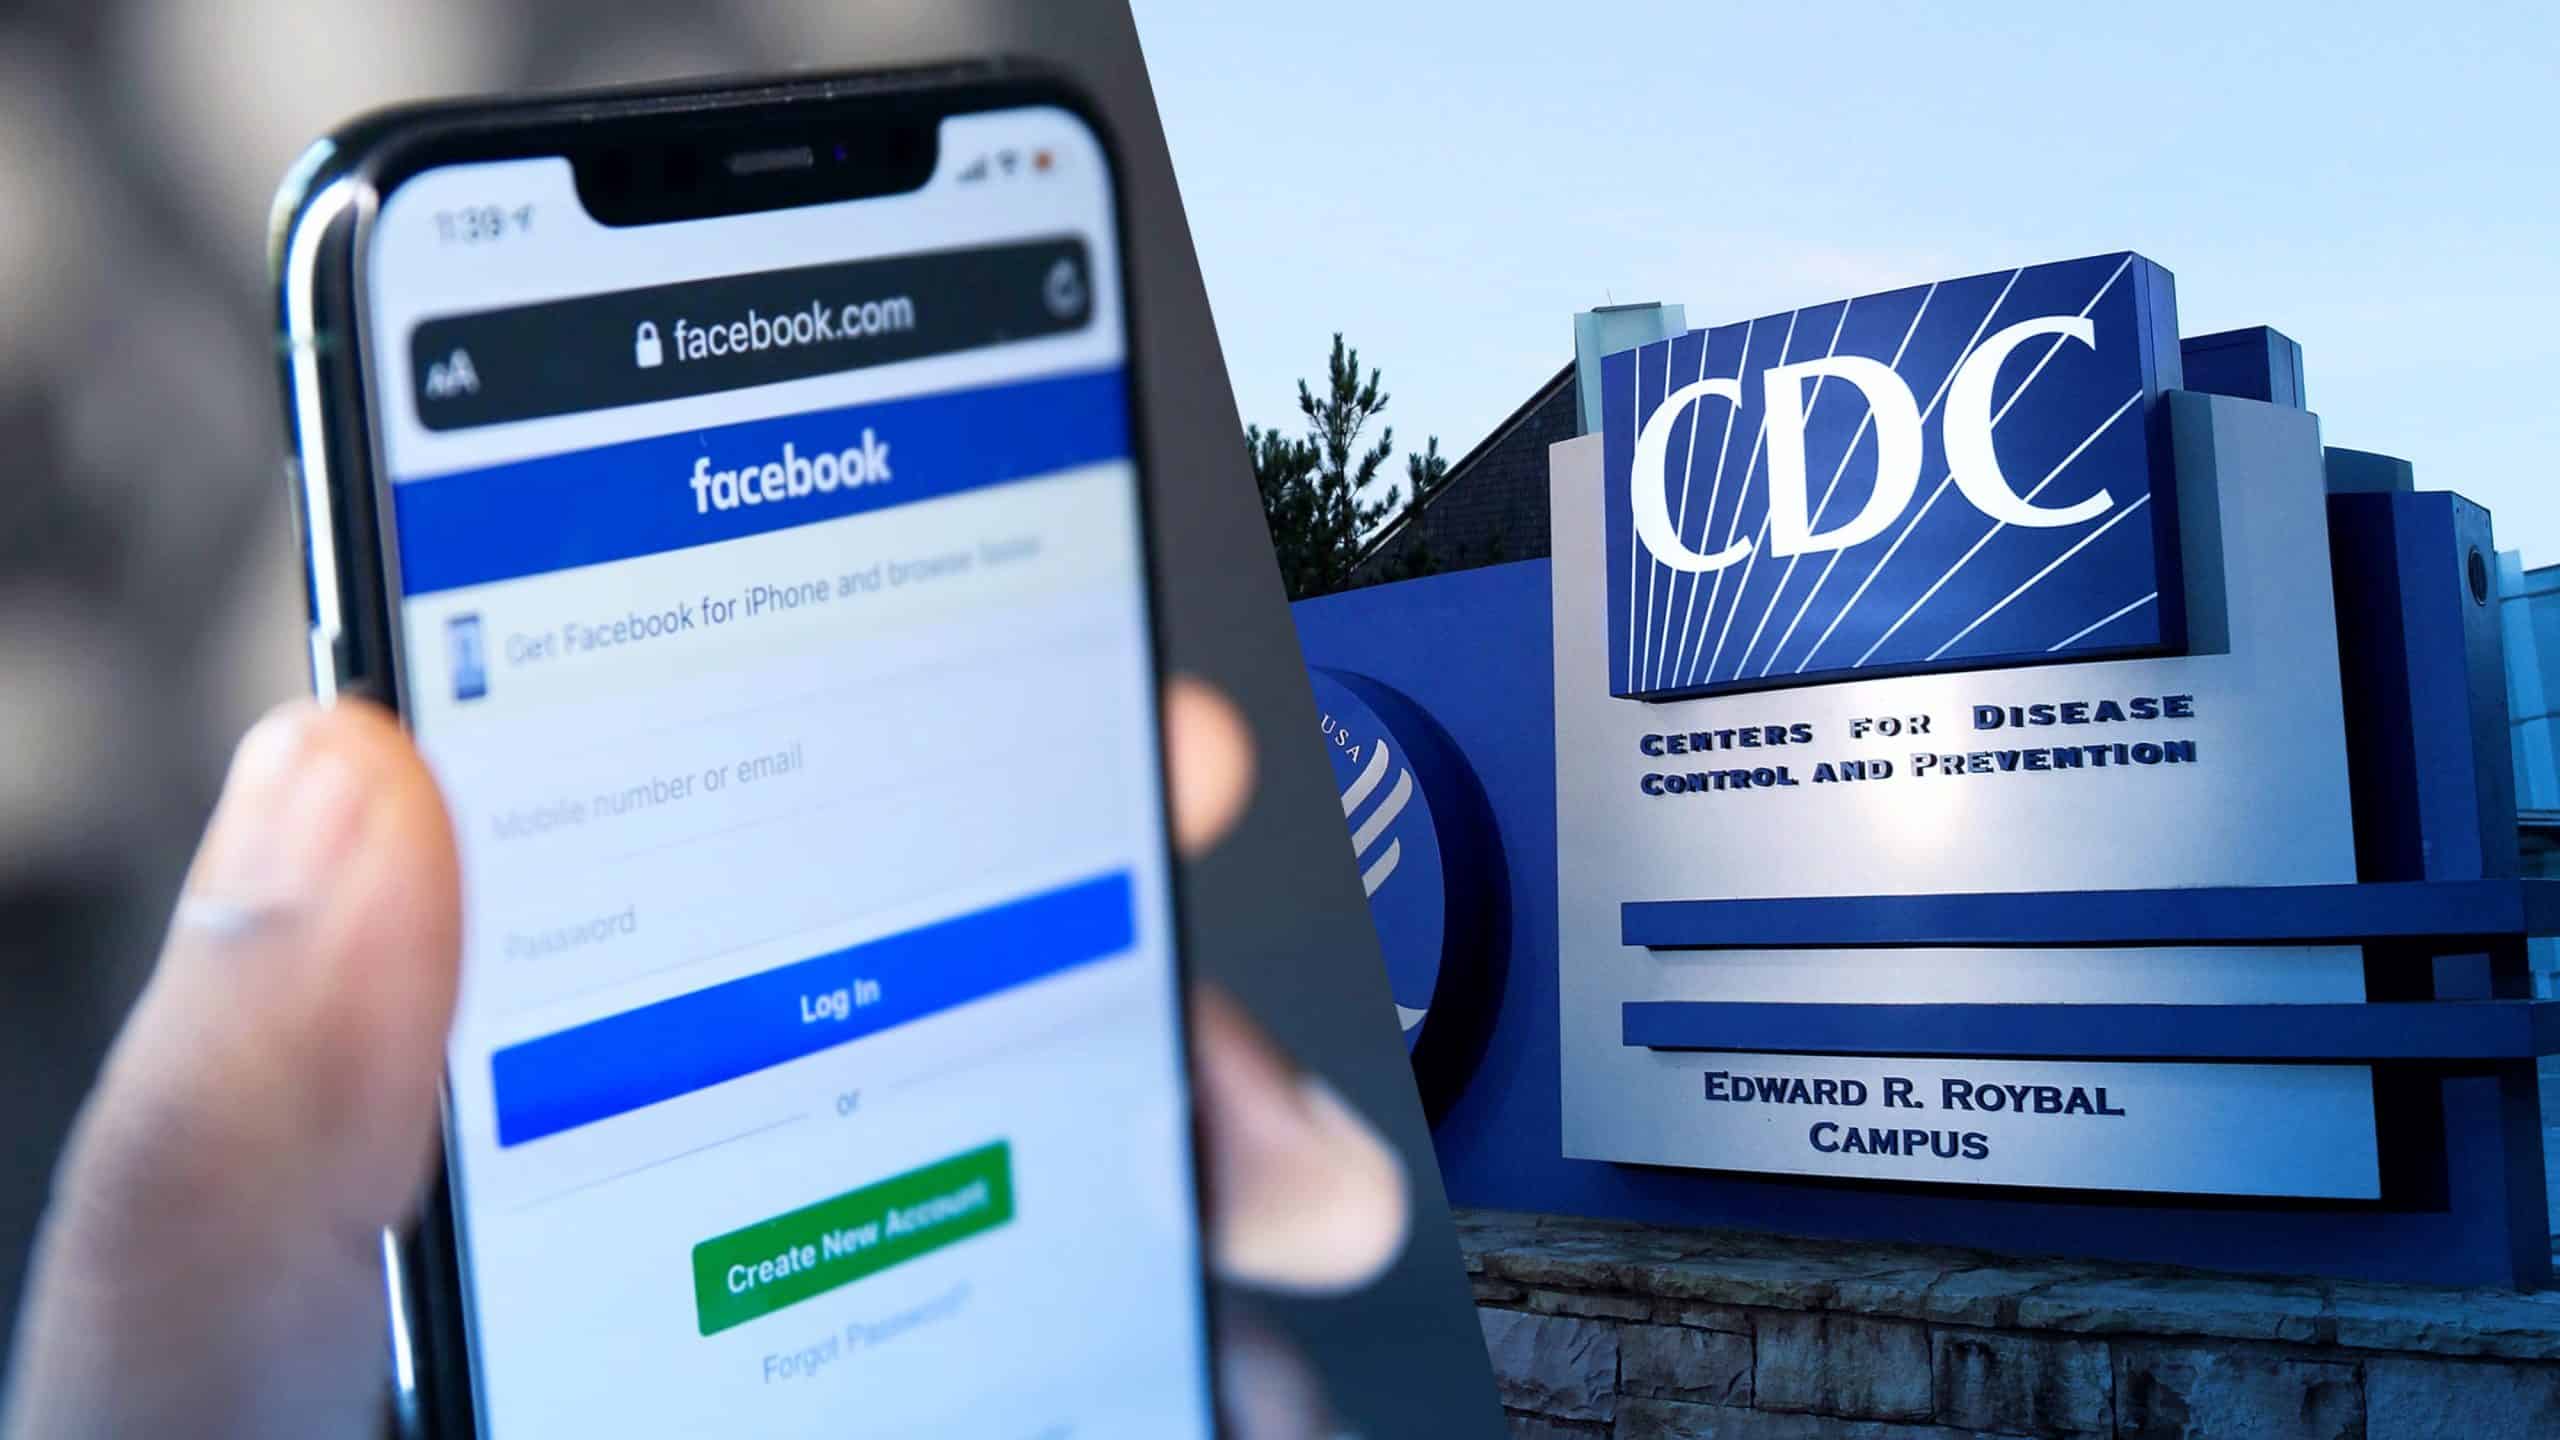 CDC and Facebook ‘Coordinated Closely’ on Censorship of
COVID-19 ‘Misinformation’: Watchdog 1